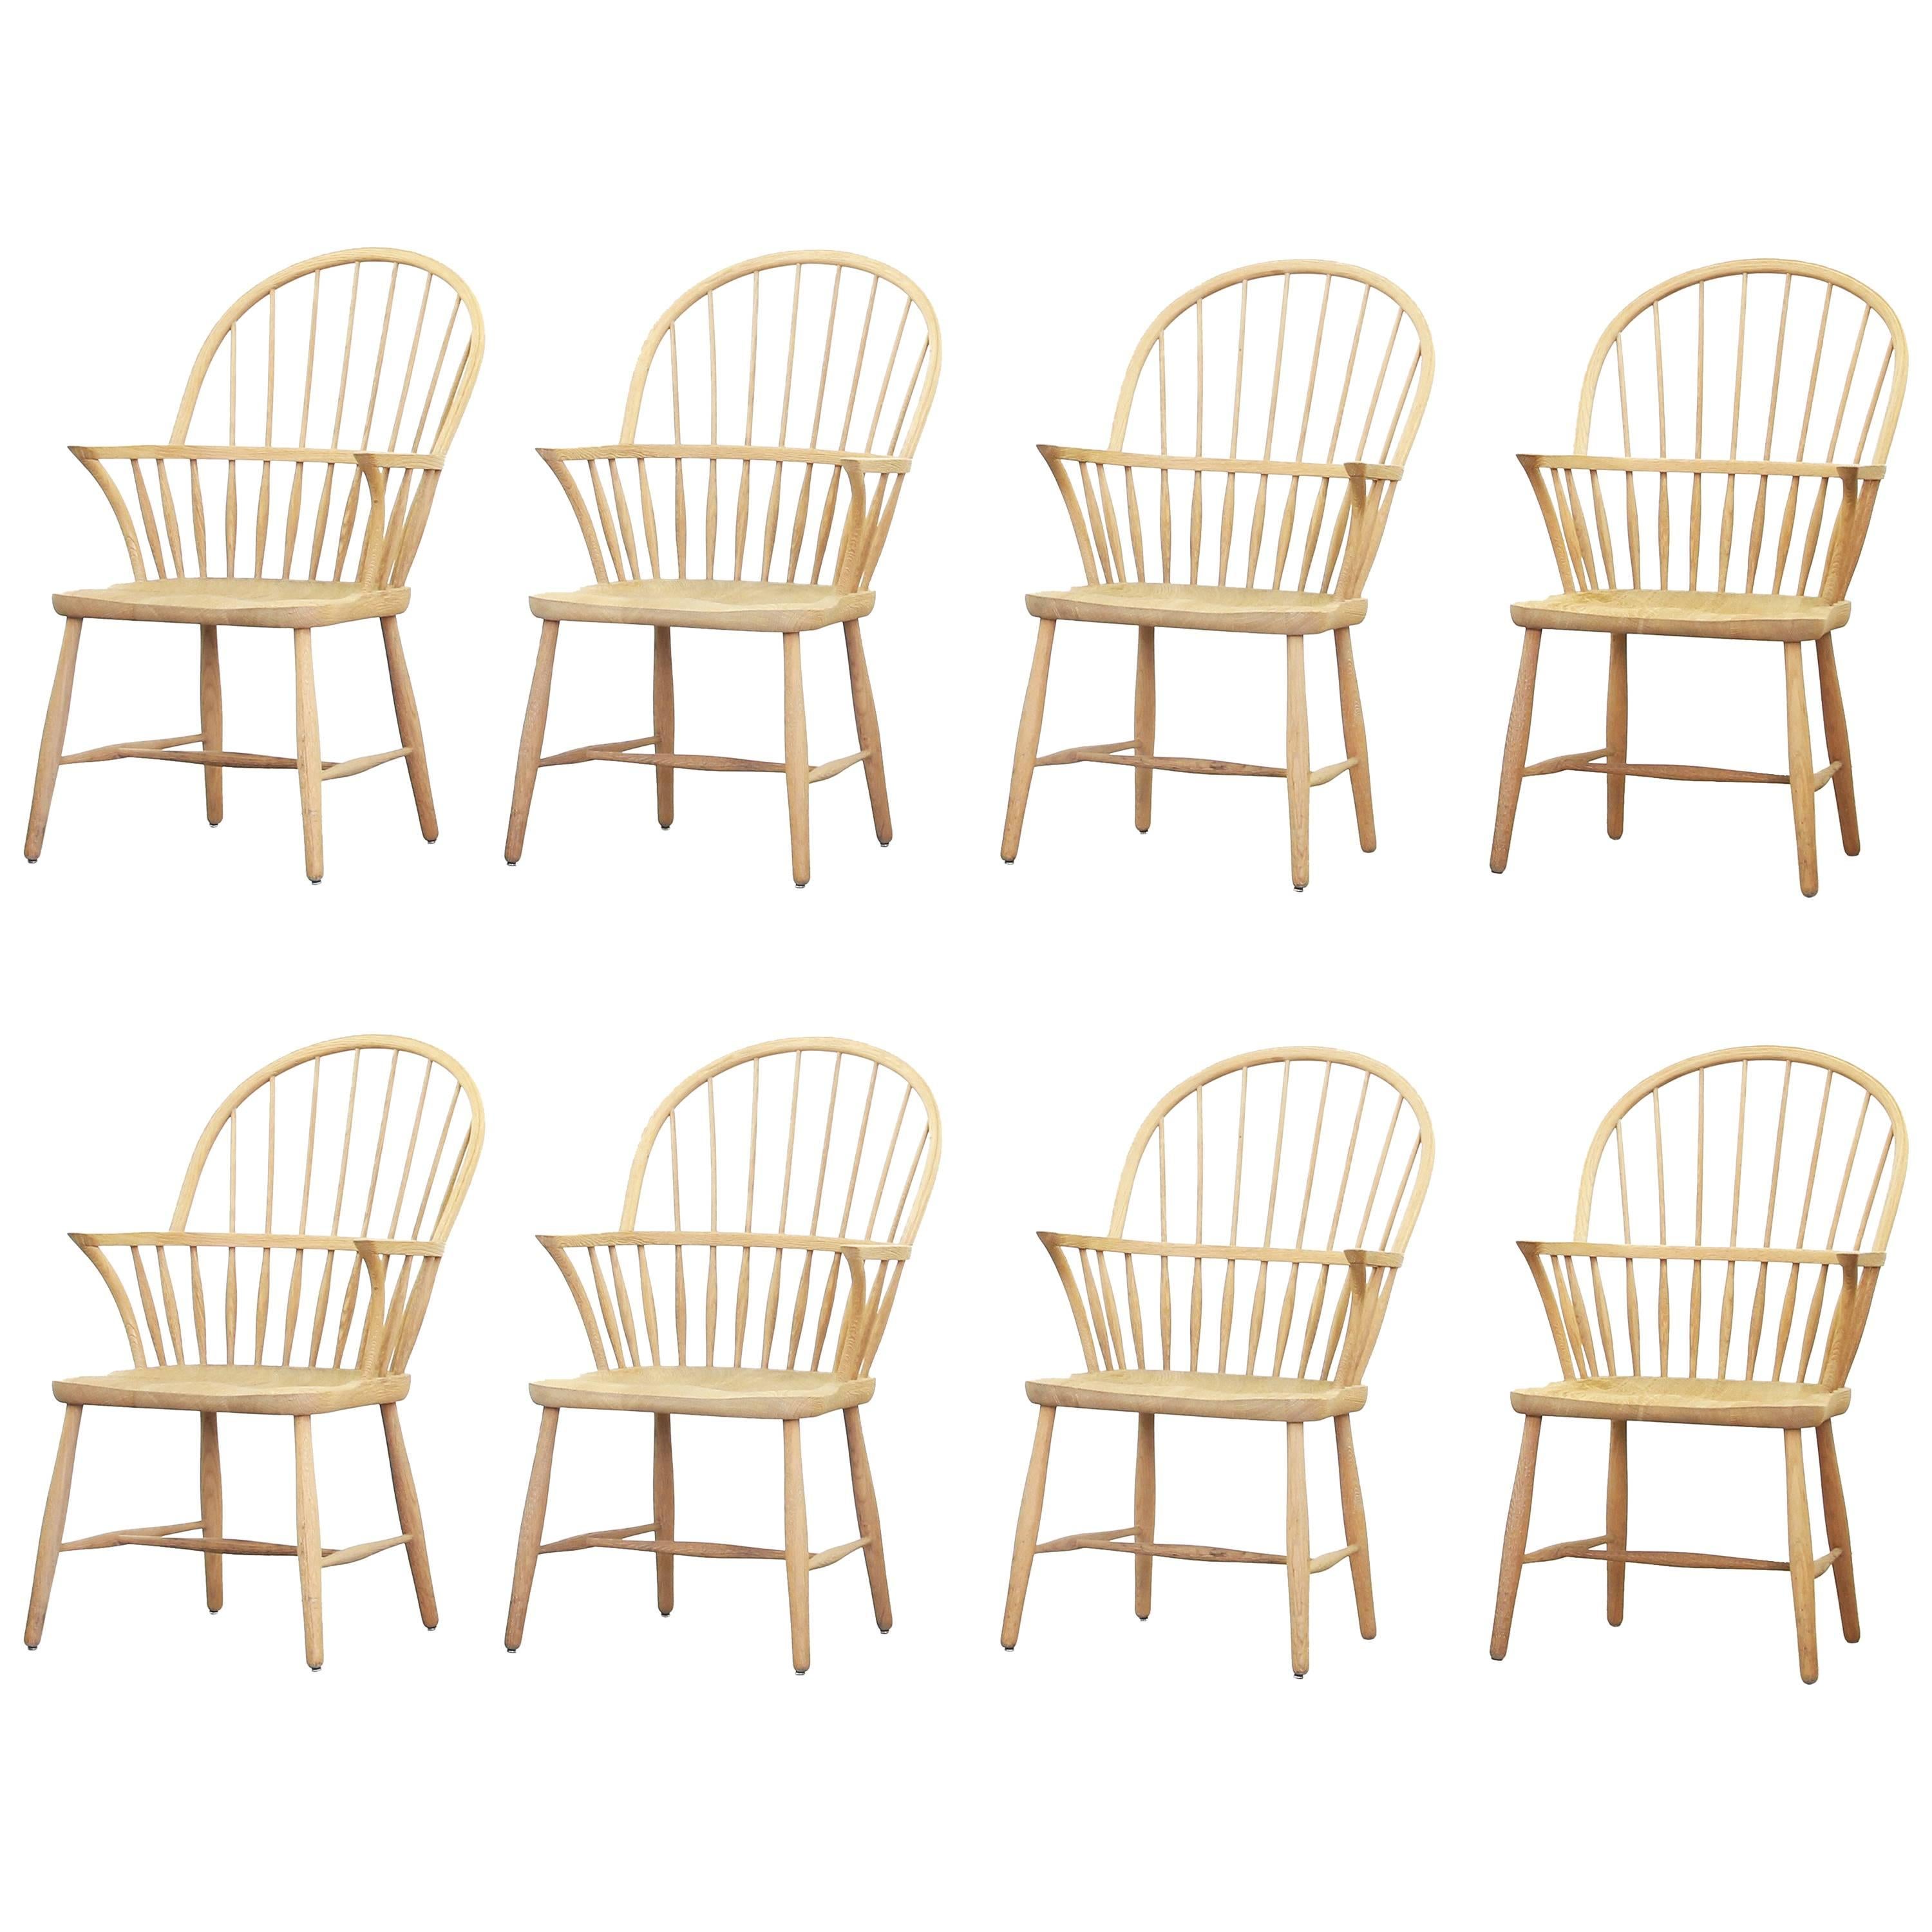 Set of Eight Windsor Dining Chairs by Frits Henningsen for Carl Hansen